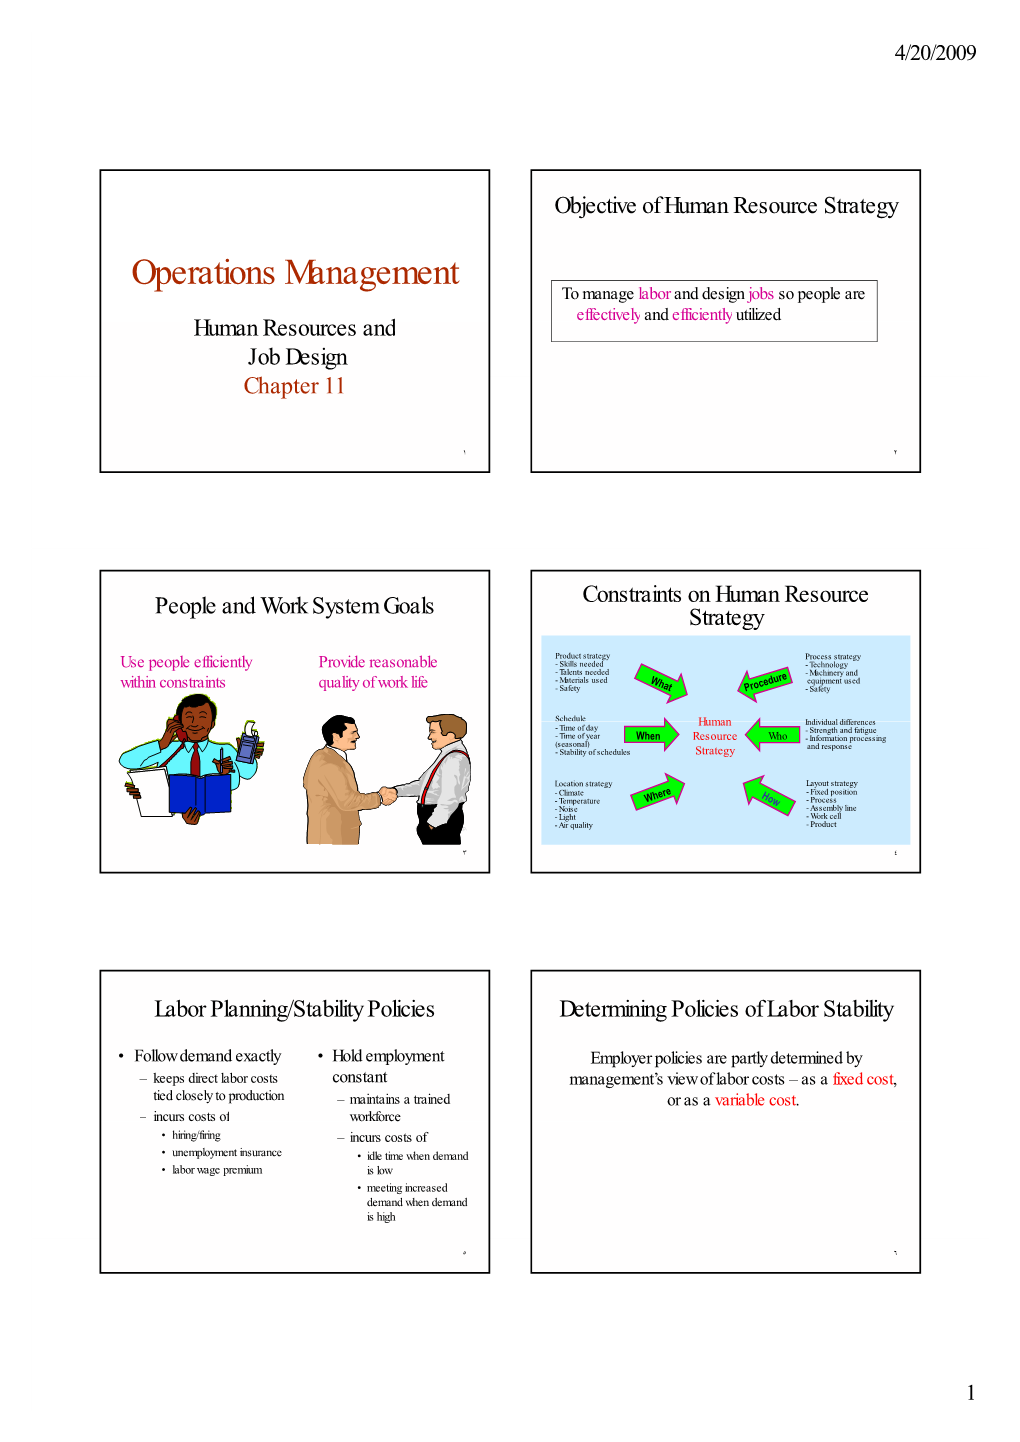 Operations Management to Manage Labor and Design Jobs So People Are Effectively and Efficiently Utilized Human Resources and Job Design Chapter 11